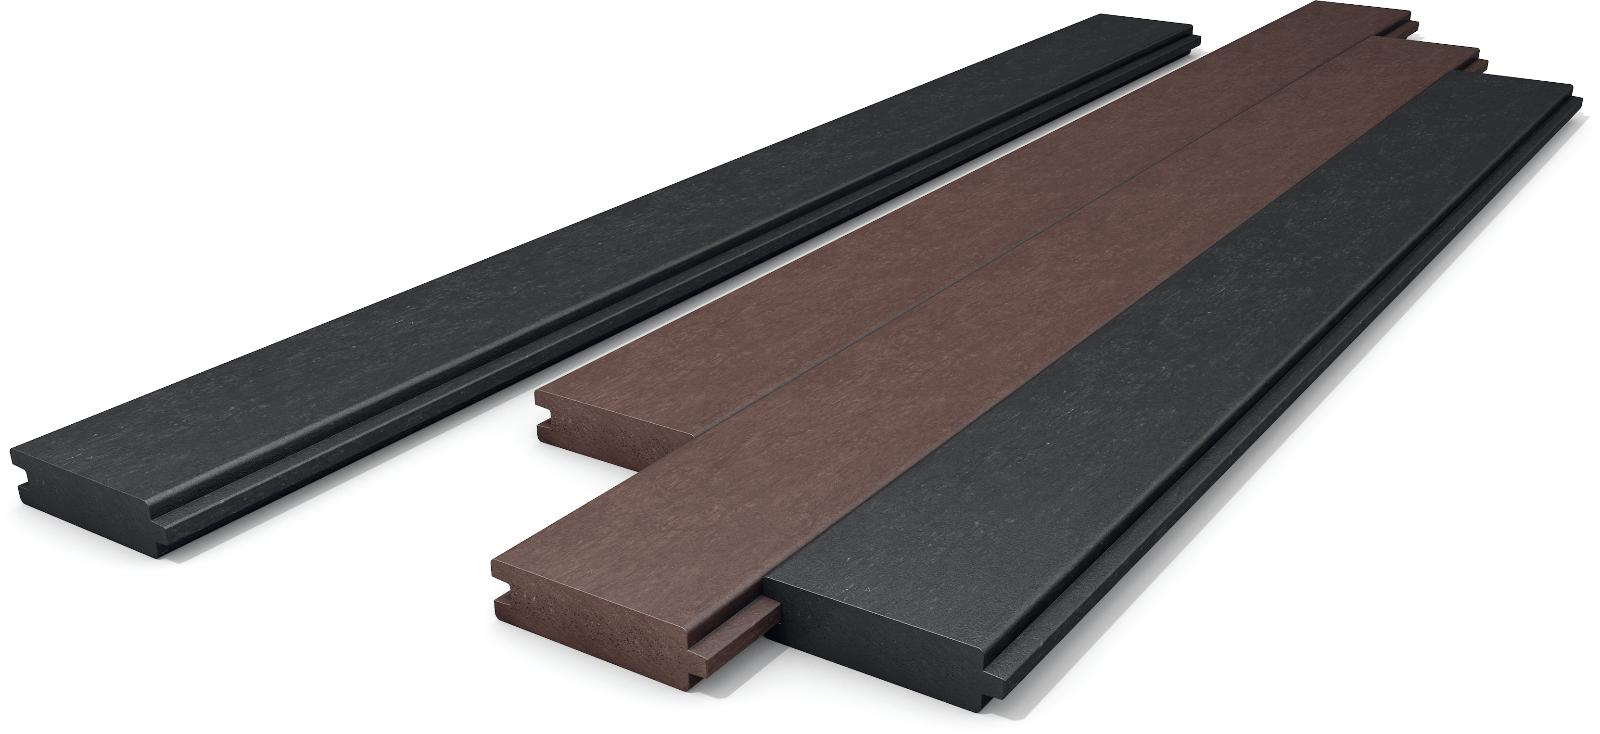 hanit ULTRA Board profile | with tongue & groove